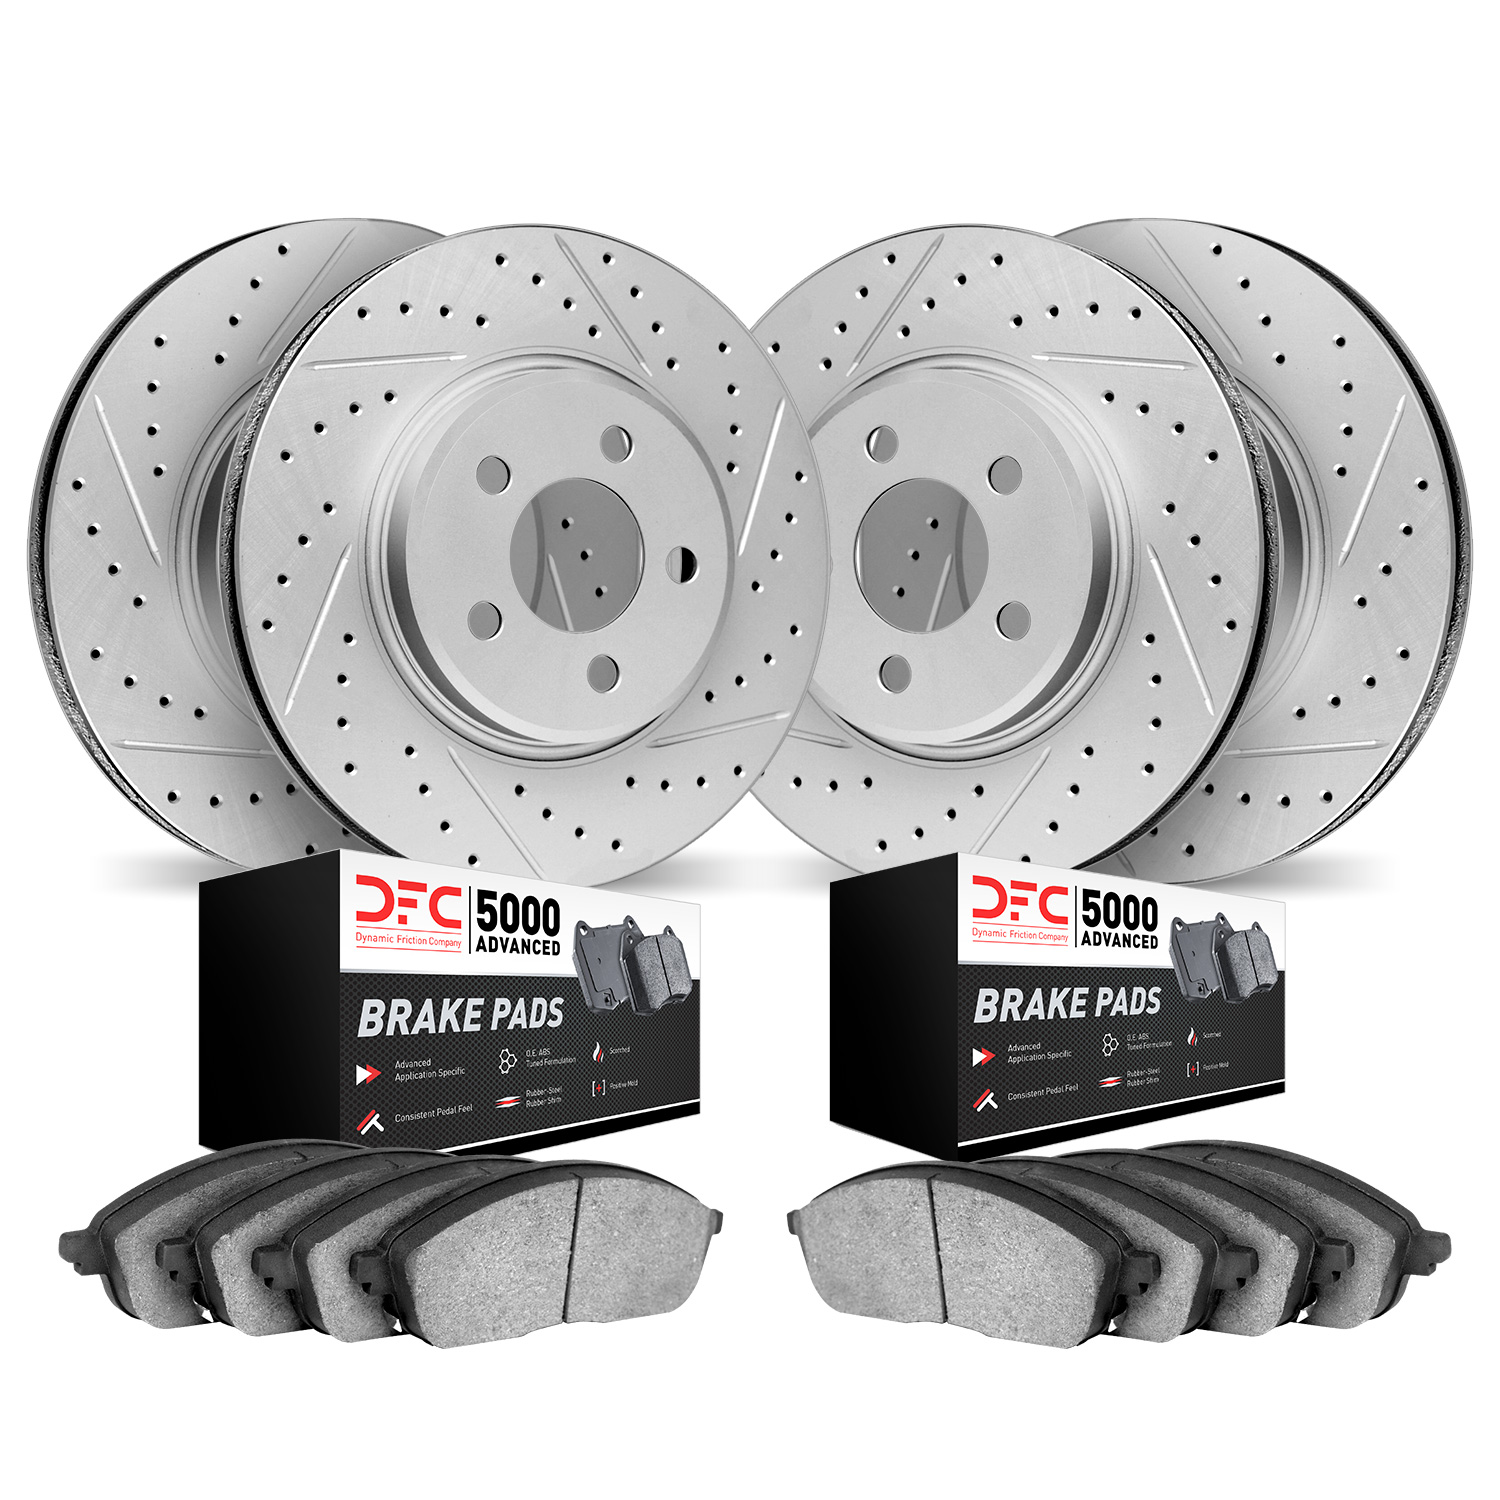 2504-67061 Geoperformance Drilled/Slotted Rotors w/5000 Advanced Brake Pads Kit, 2003-2004 Infiniti/Nissan, Position: Front and